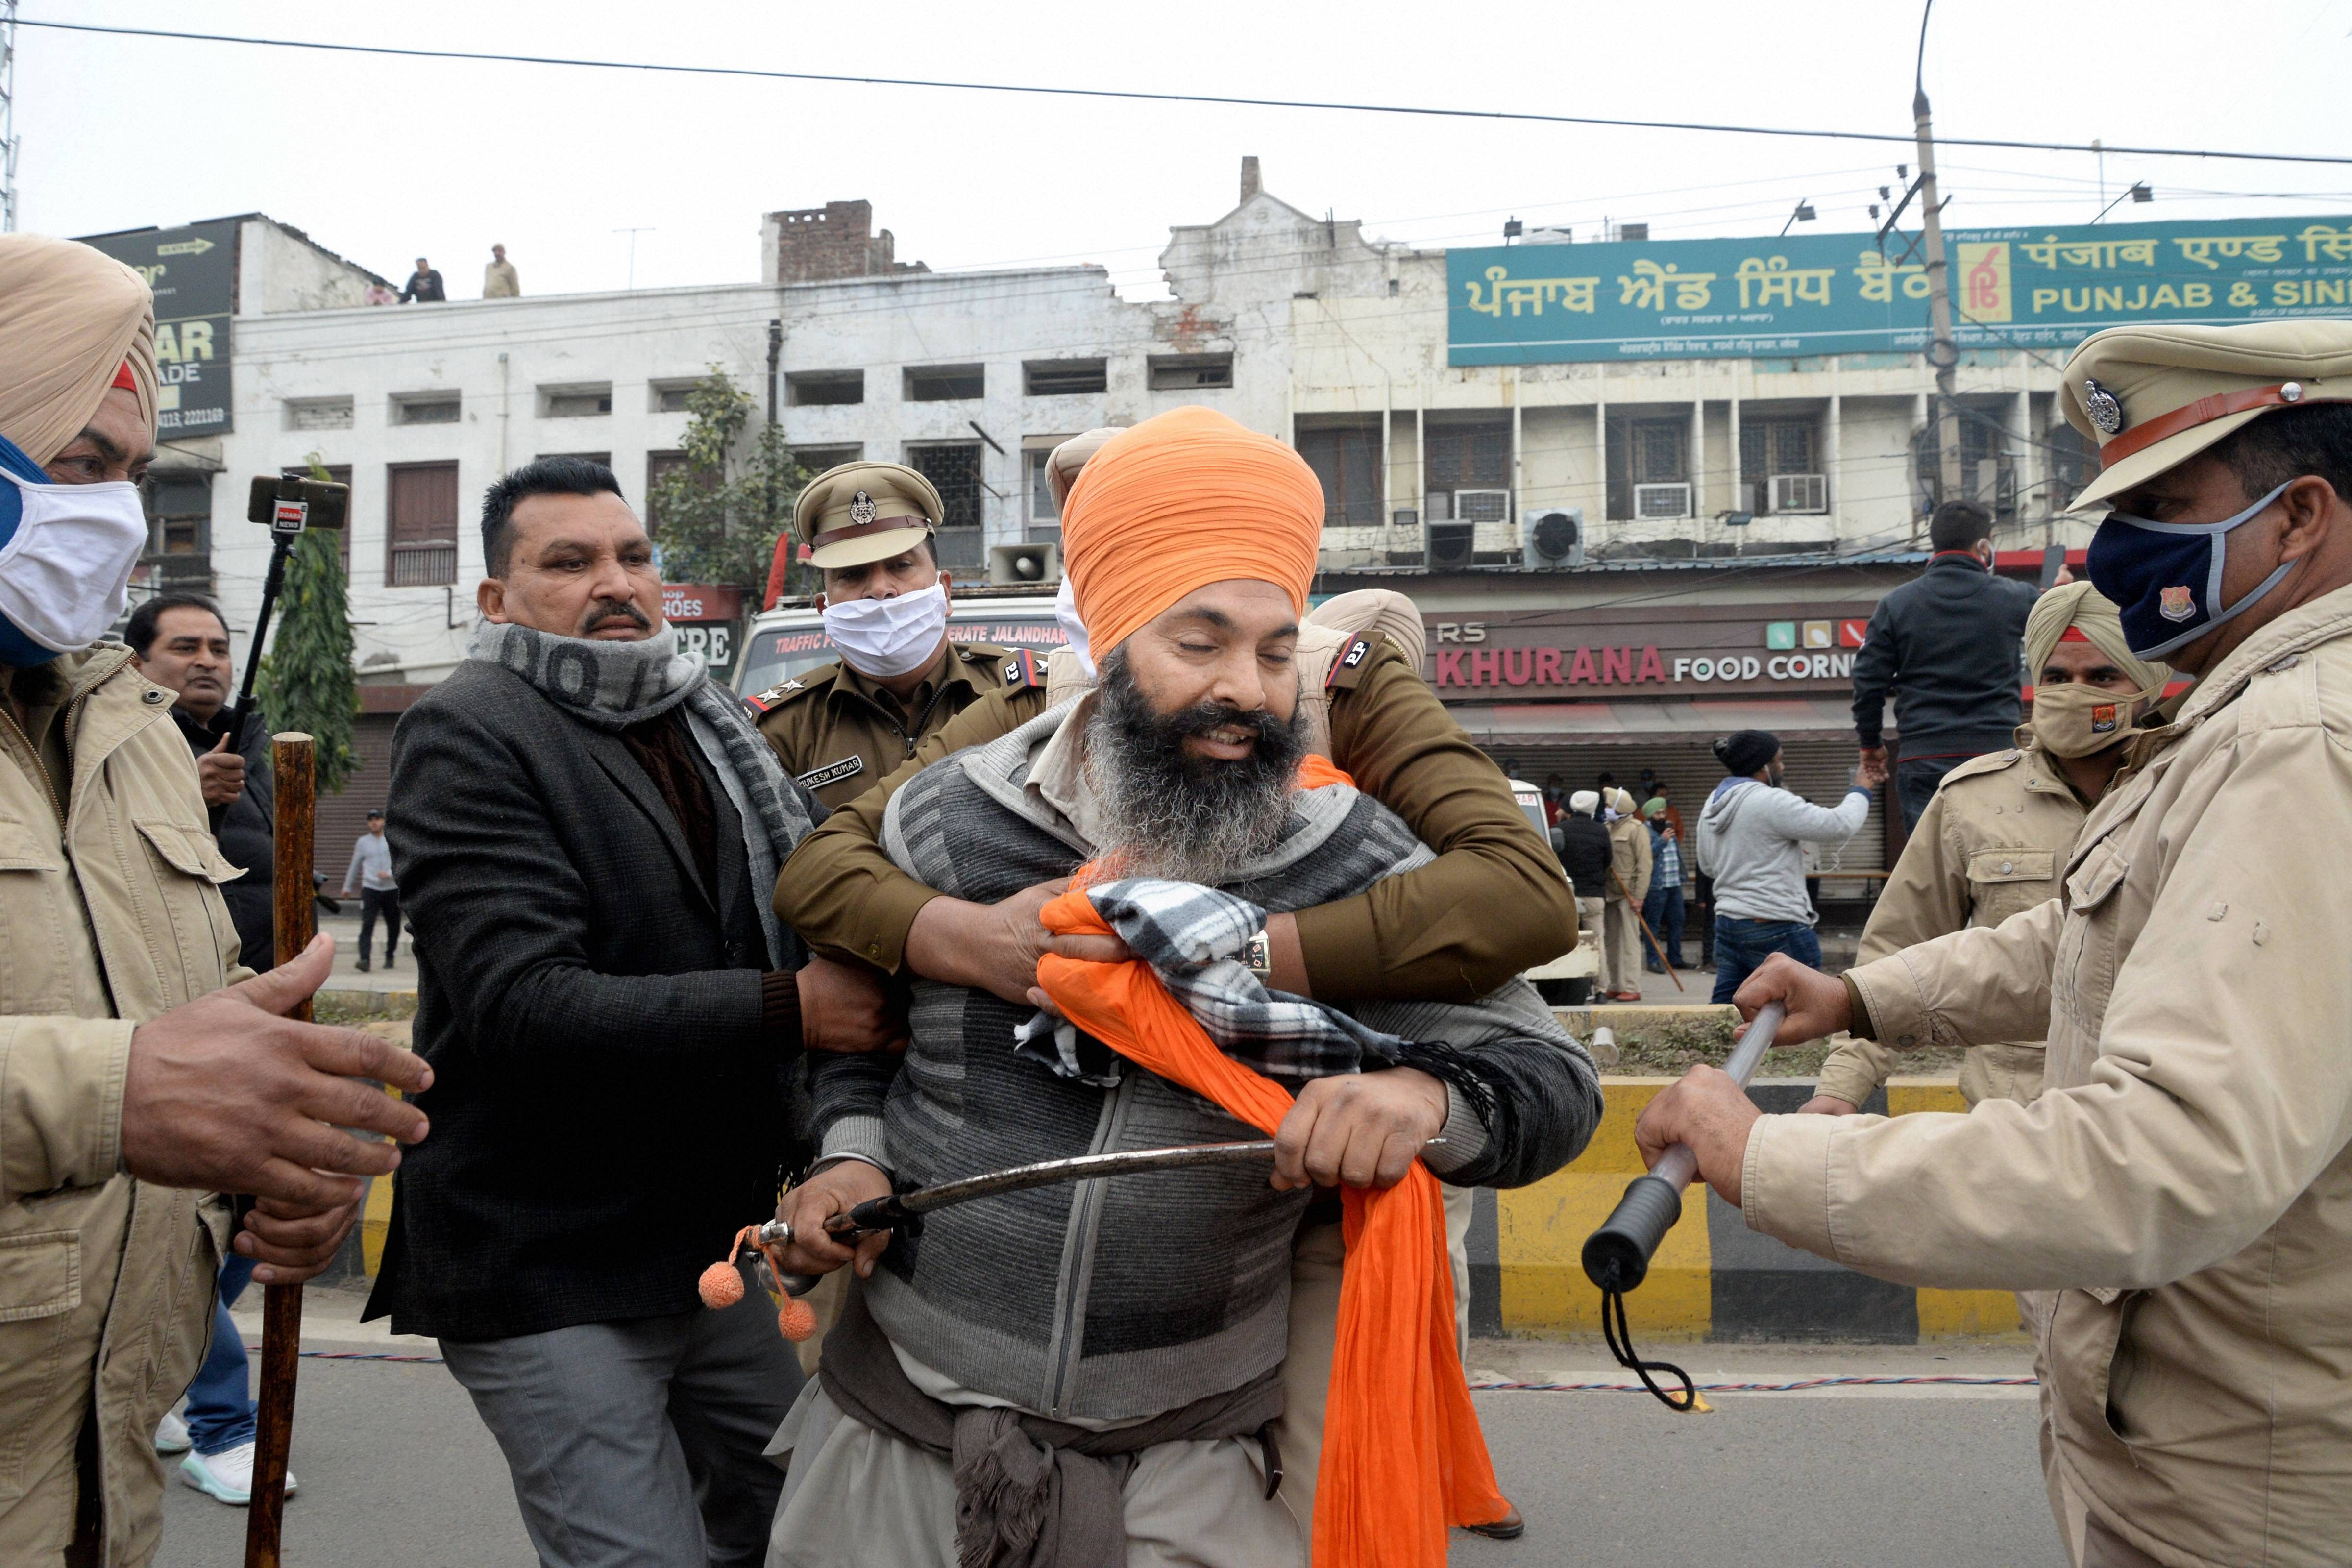 Police stop farmers as they try to stop the ongoing Punjab BJP President Ashwani Sharma's function during their protest, in Jalandhar, Sunday, Jan. 10, 2021. Credit: PTI Photo